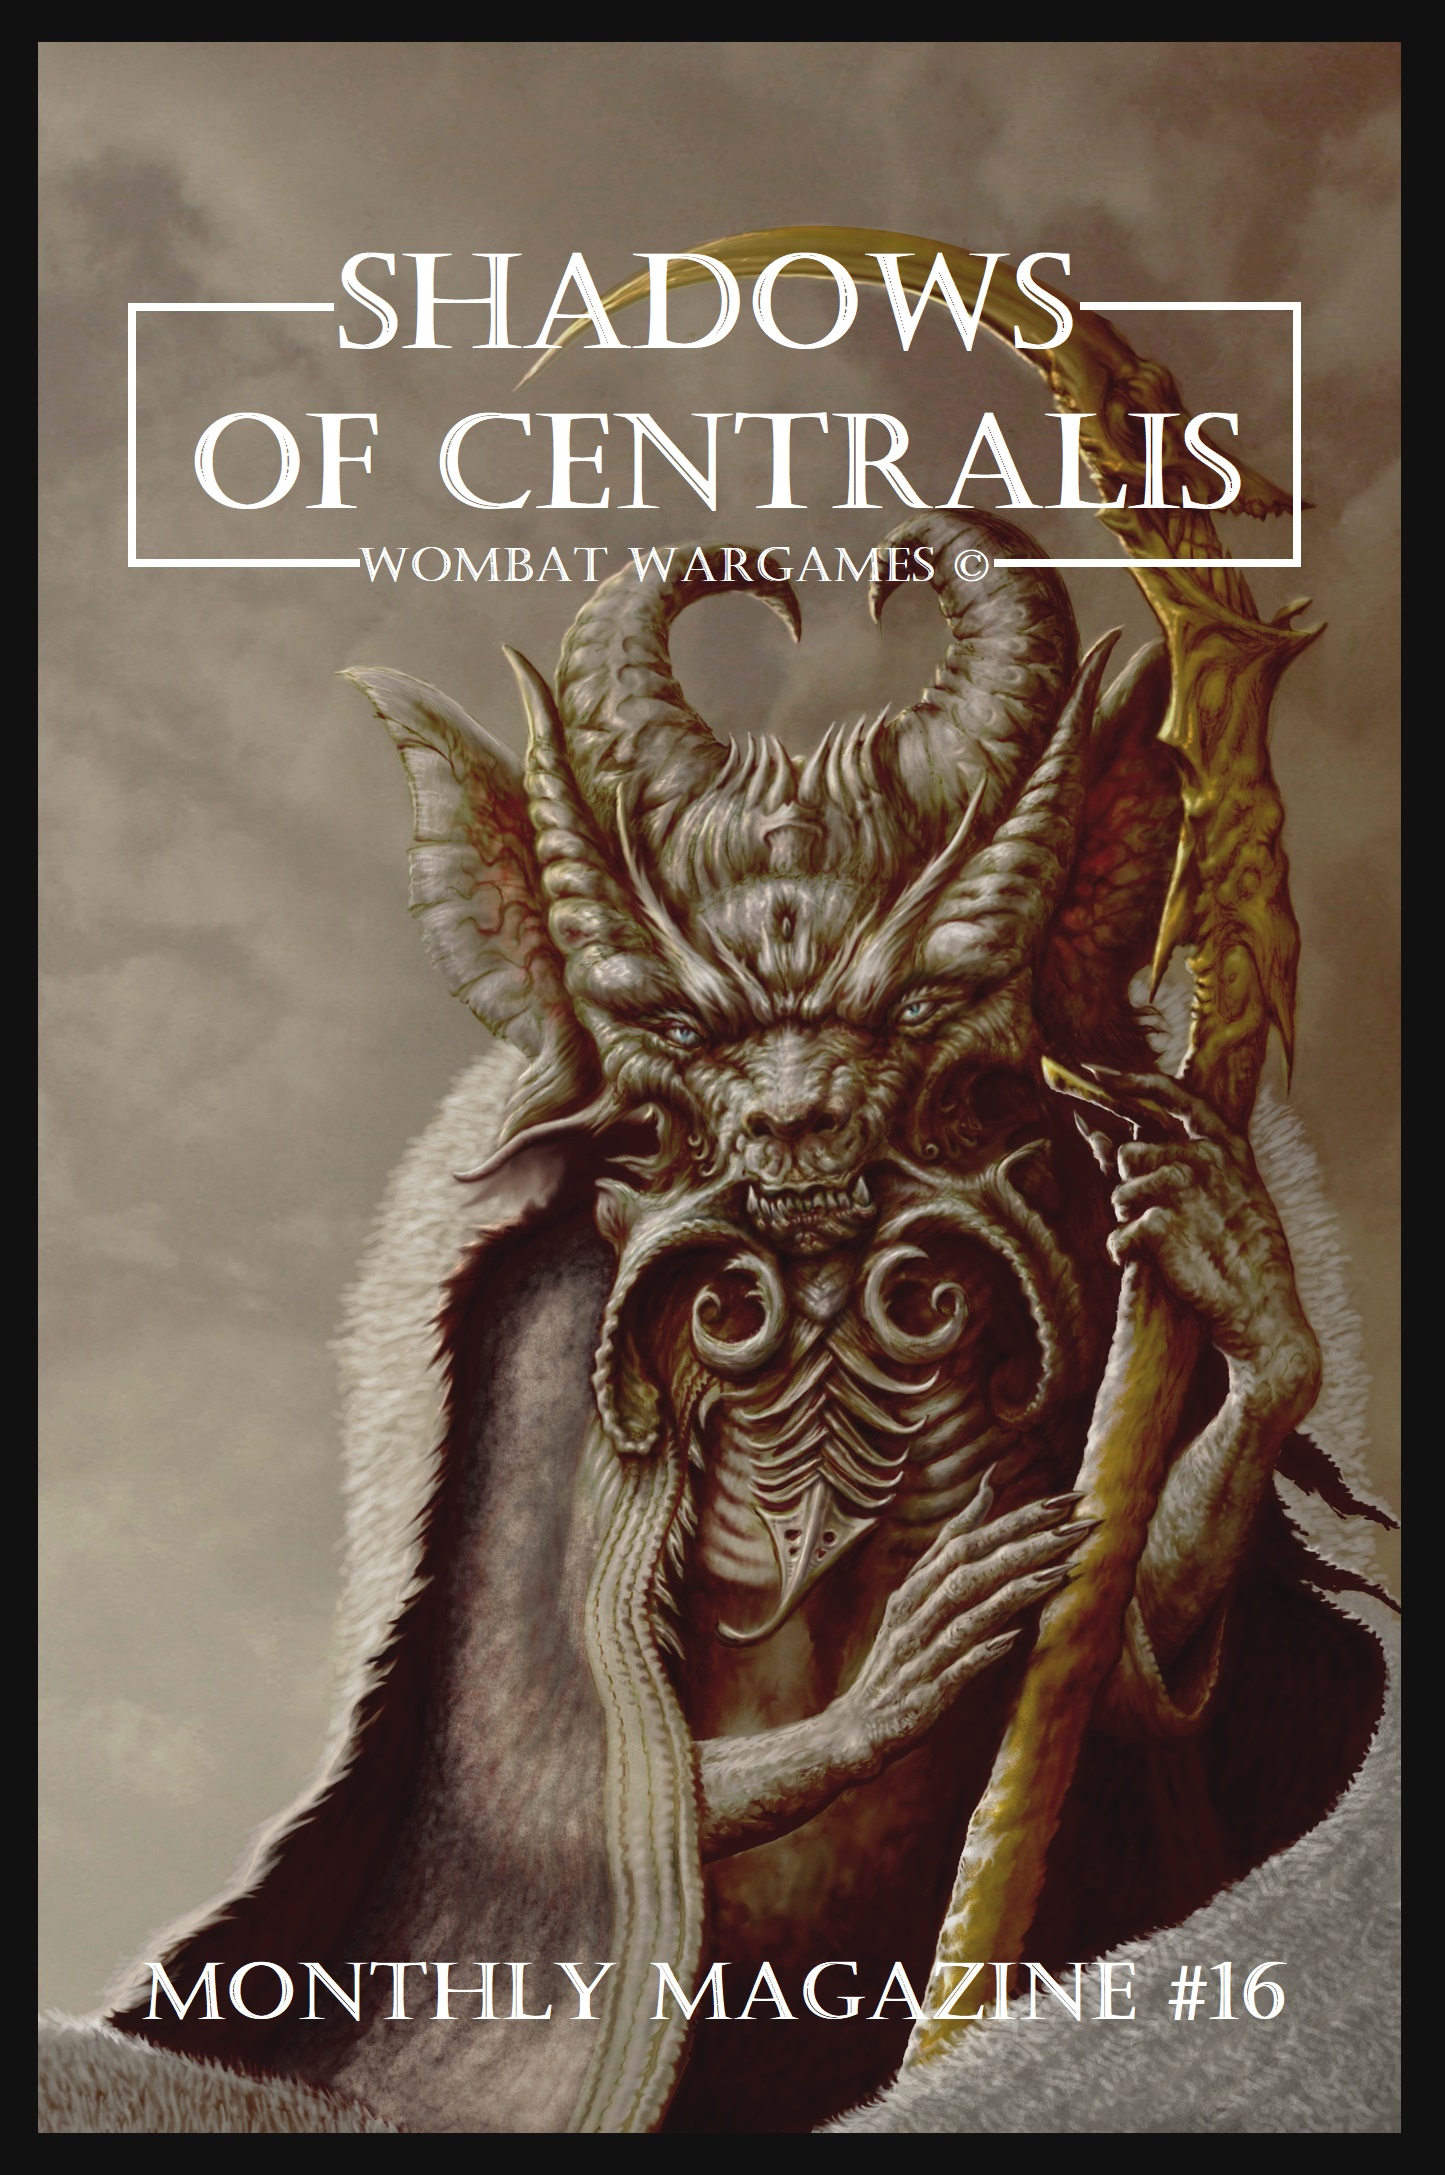 Shadows of Centralis Monthly Magazine #16 (July 2023) by Wombat Wargames